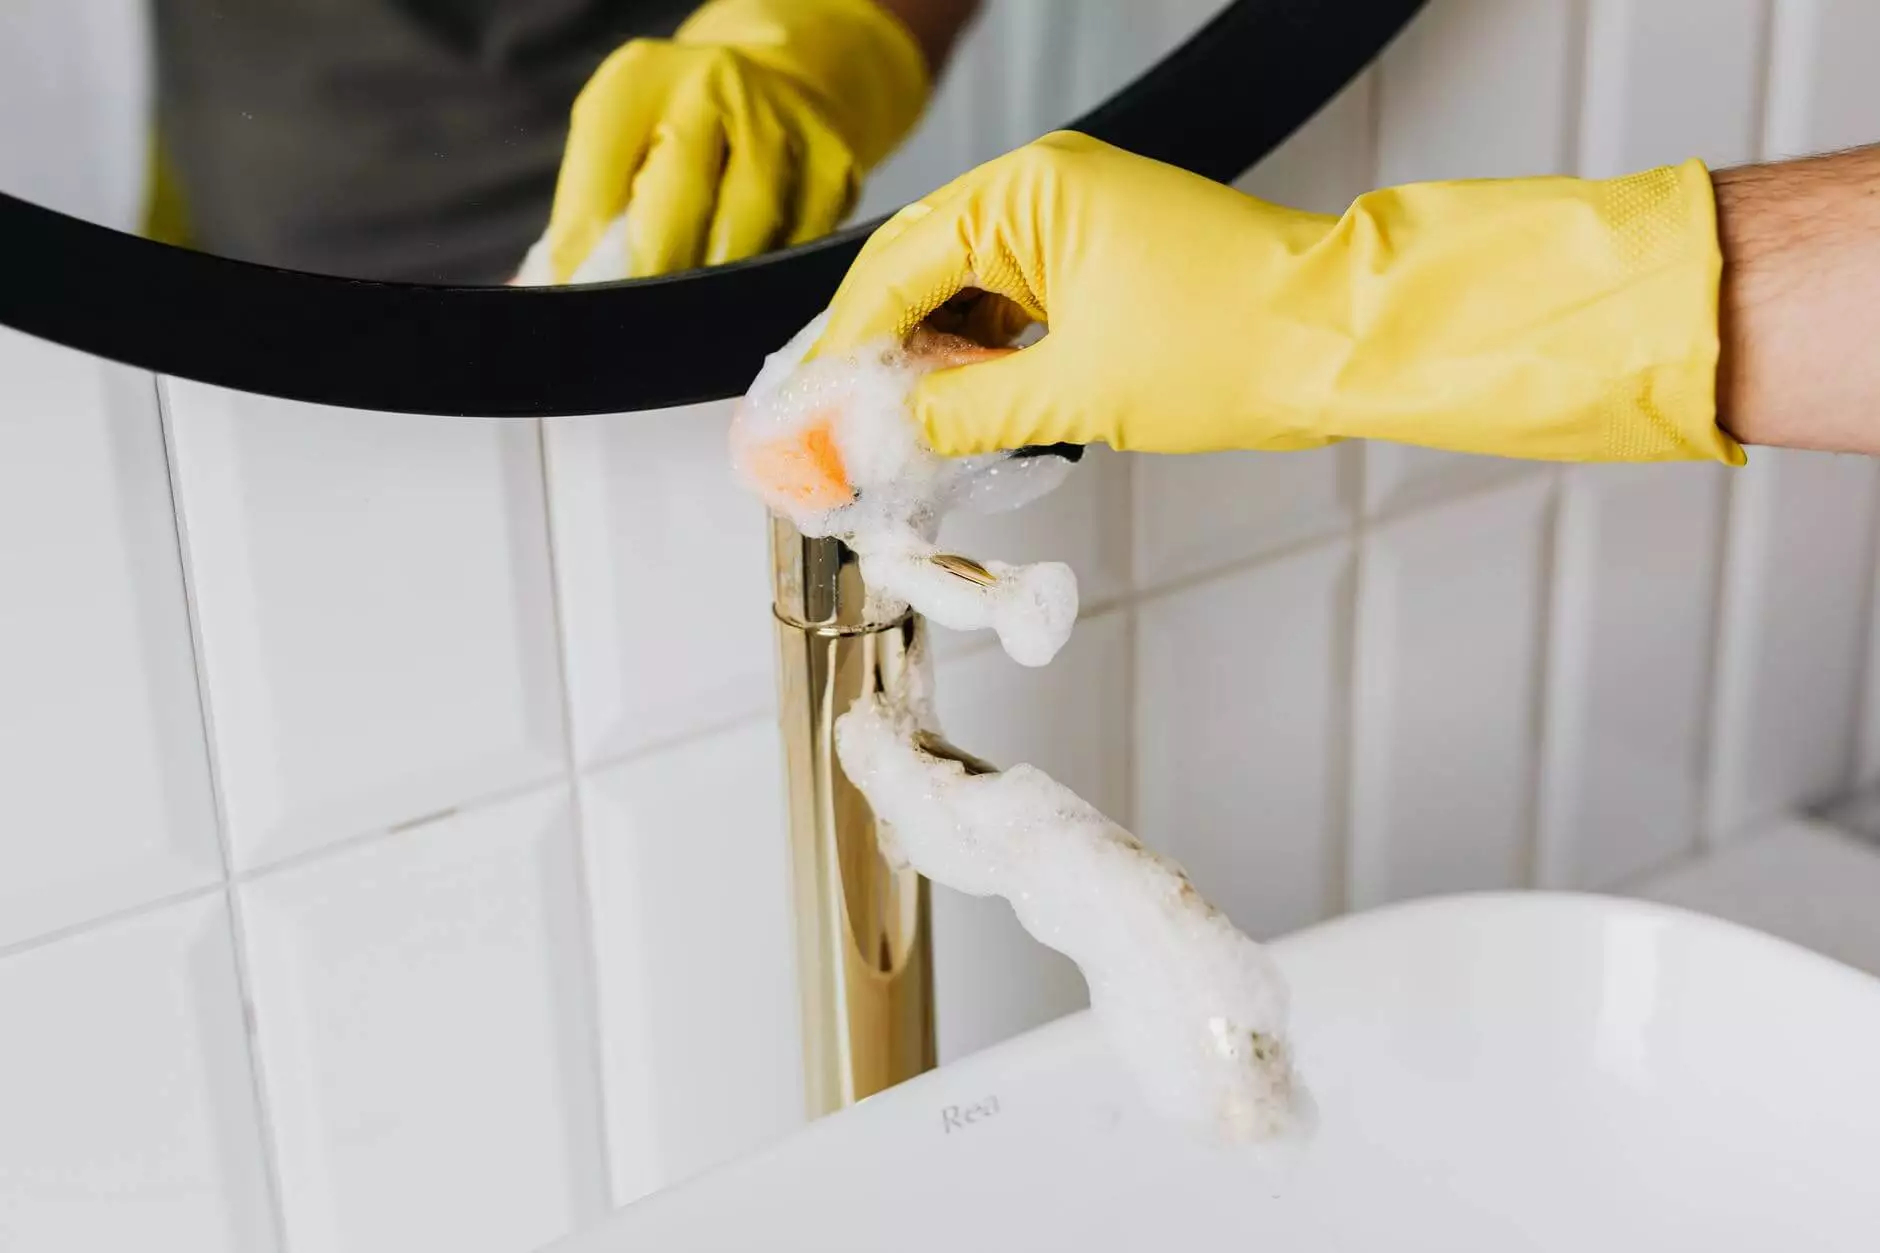 The right way to clean and disinfect household surfaces - The